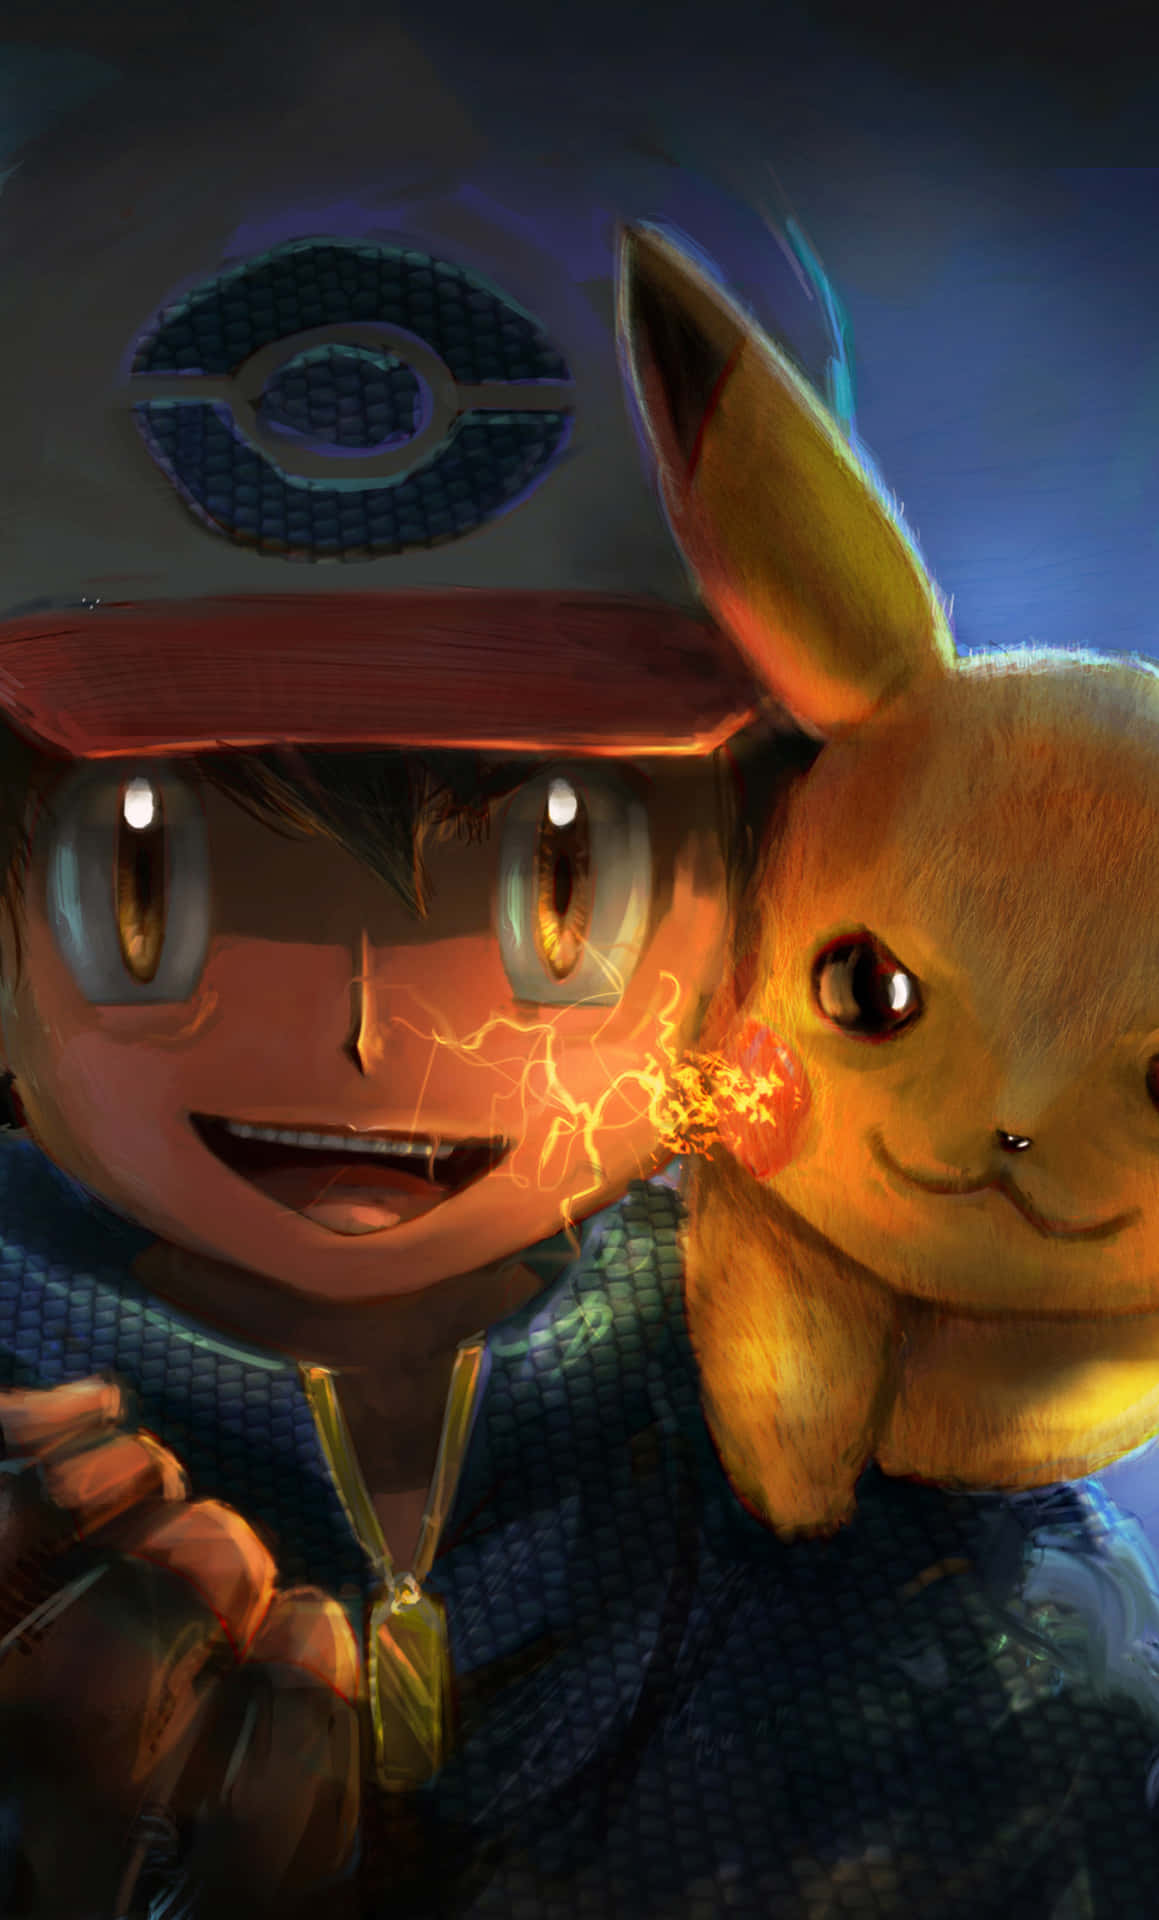 "Partners in Adventure: Ash and Pikachu" Wallpaper